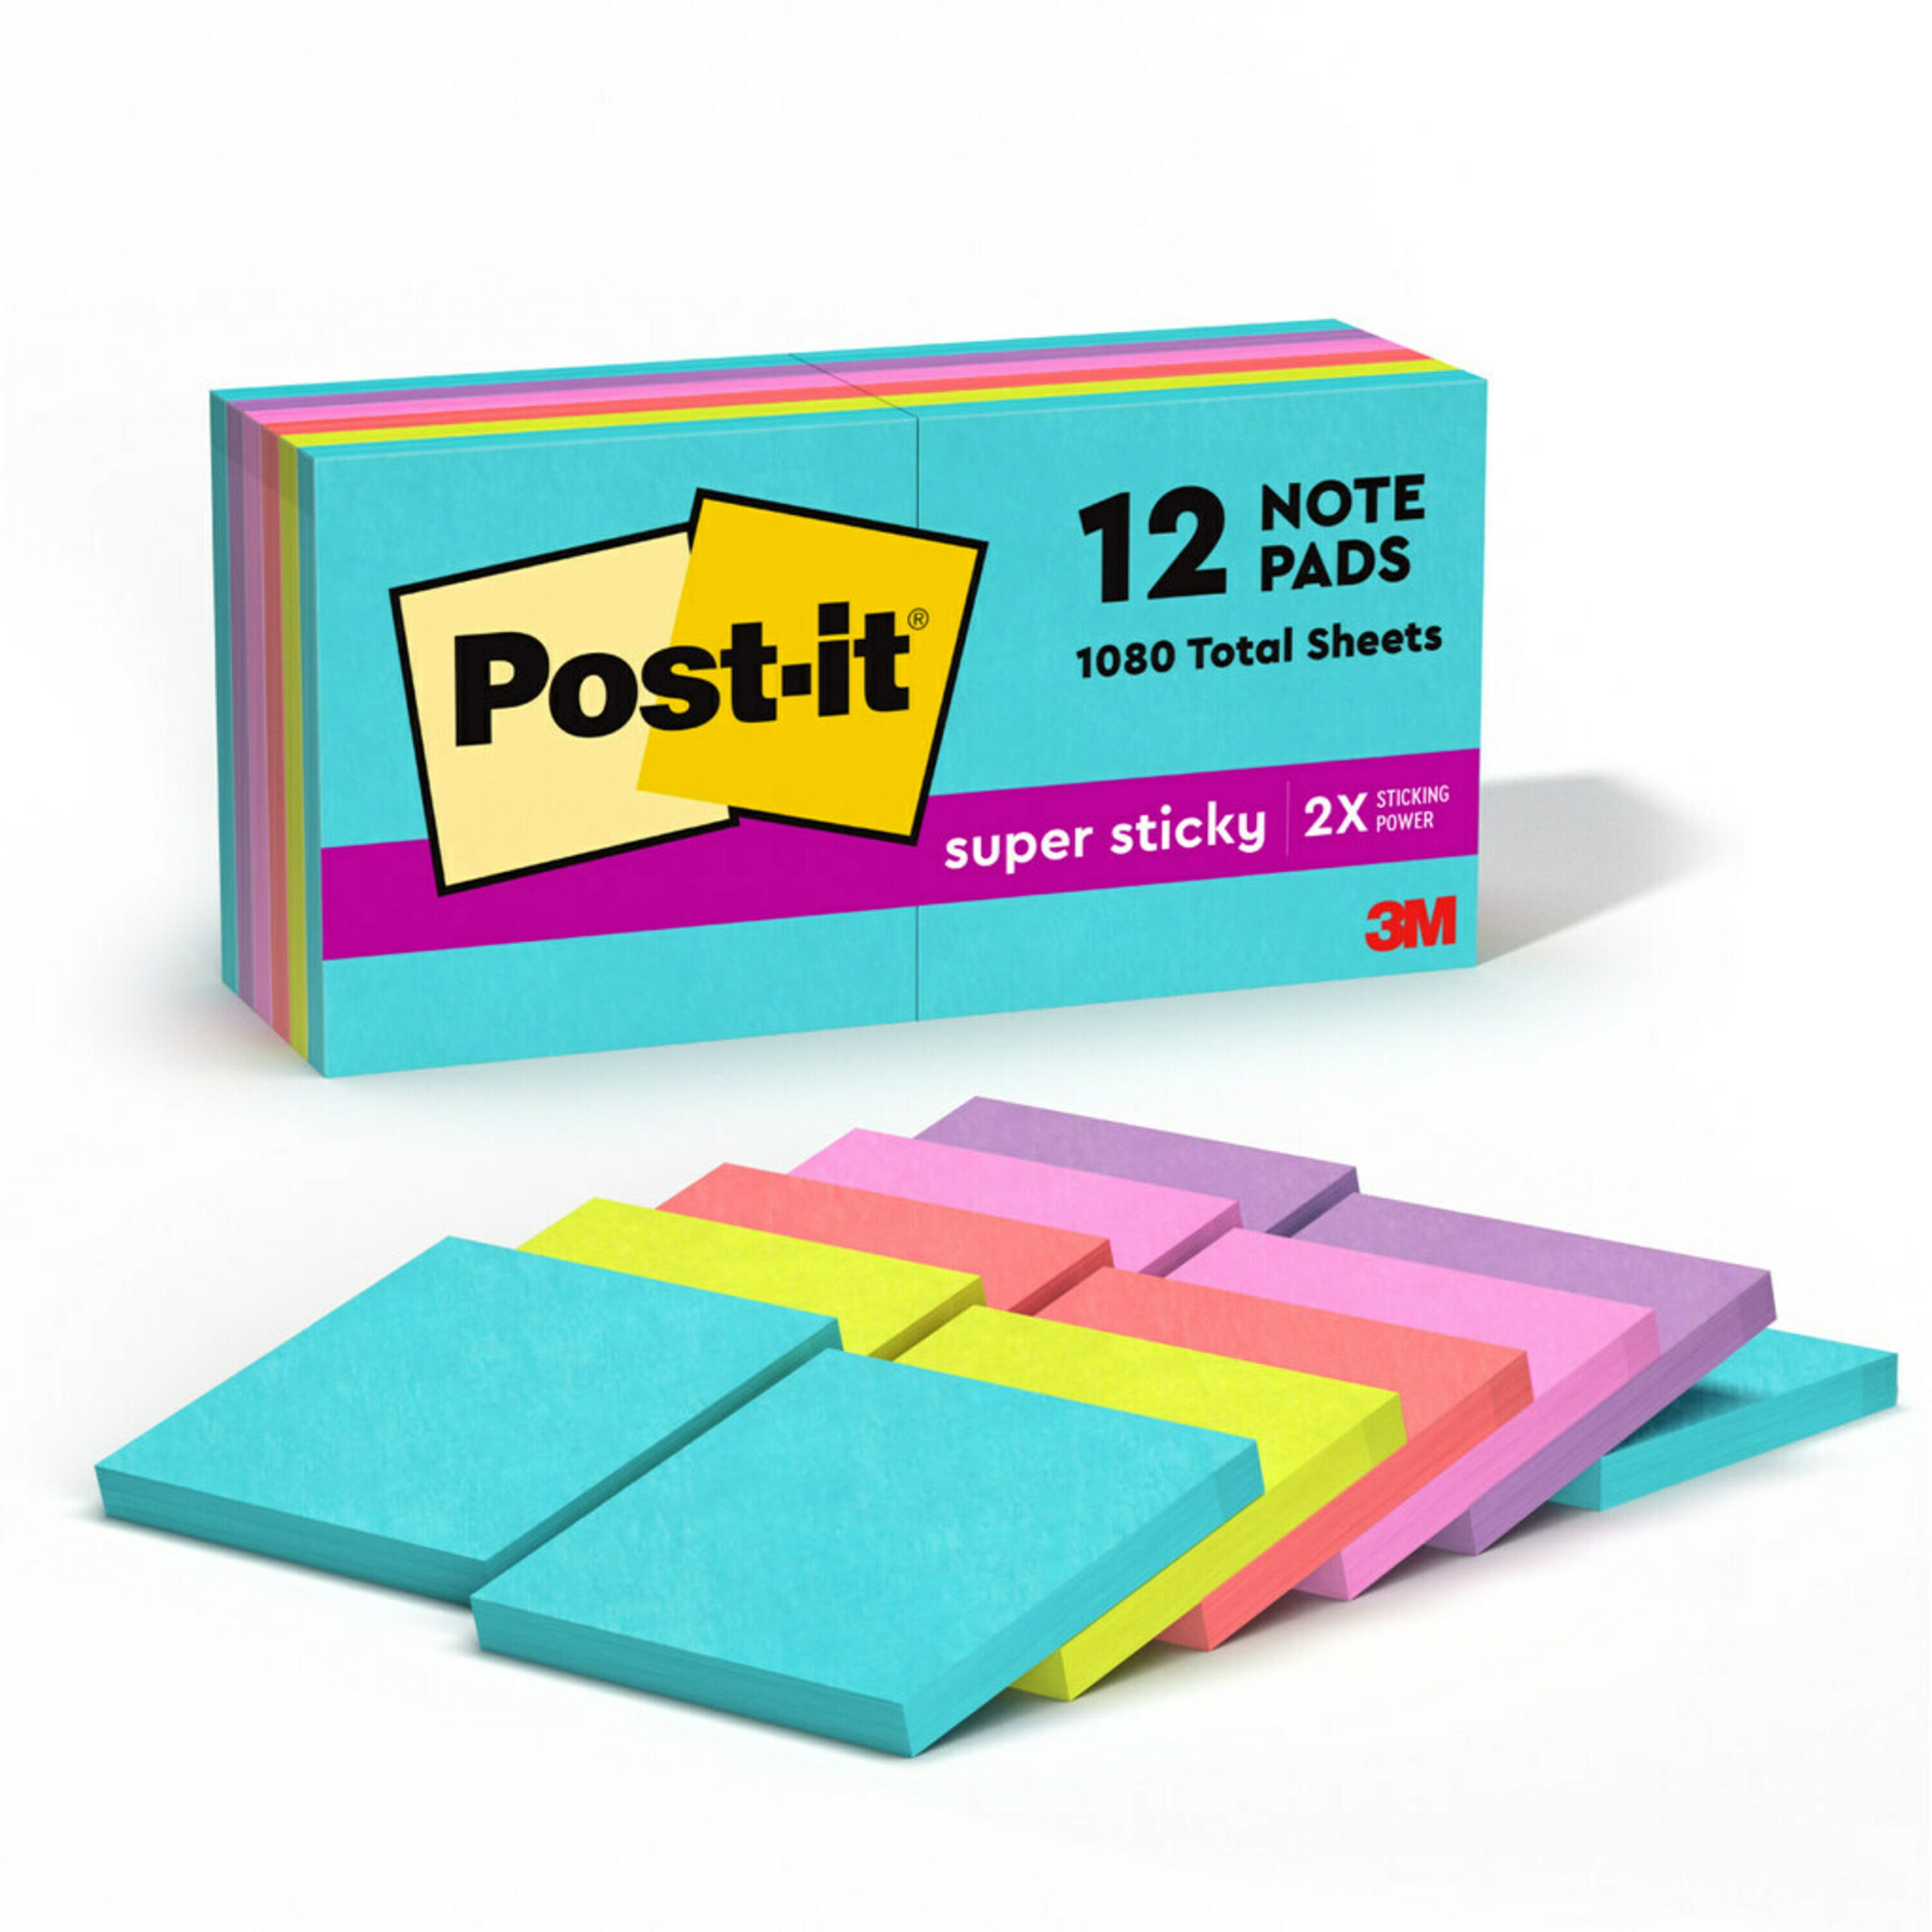 Post-it, Lined Super Sticky Note Pad, Coloured Notes Pink, Green, Memo Note  Pad for Note Taking and Making Lists, 2 Pads of 45 Sheets, Post-it Note